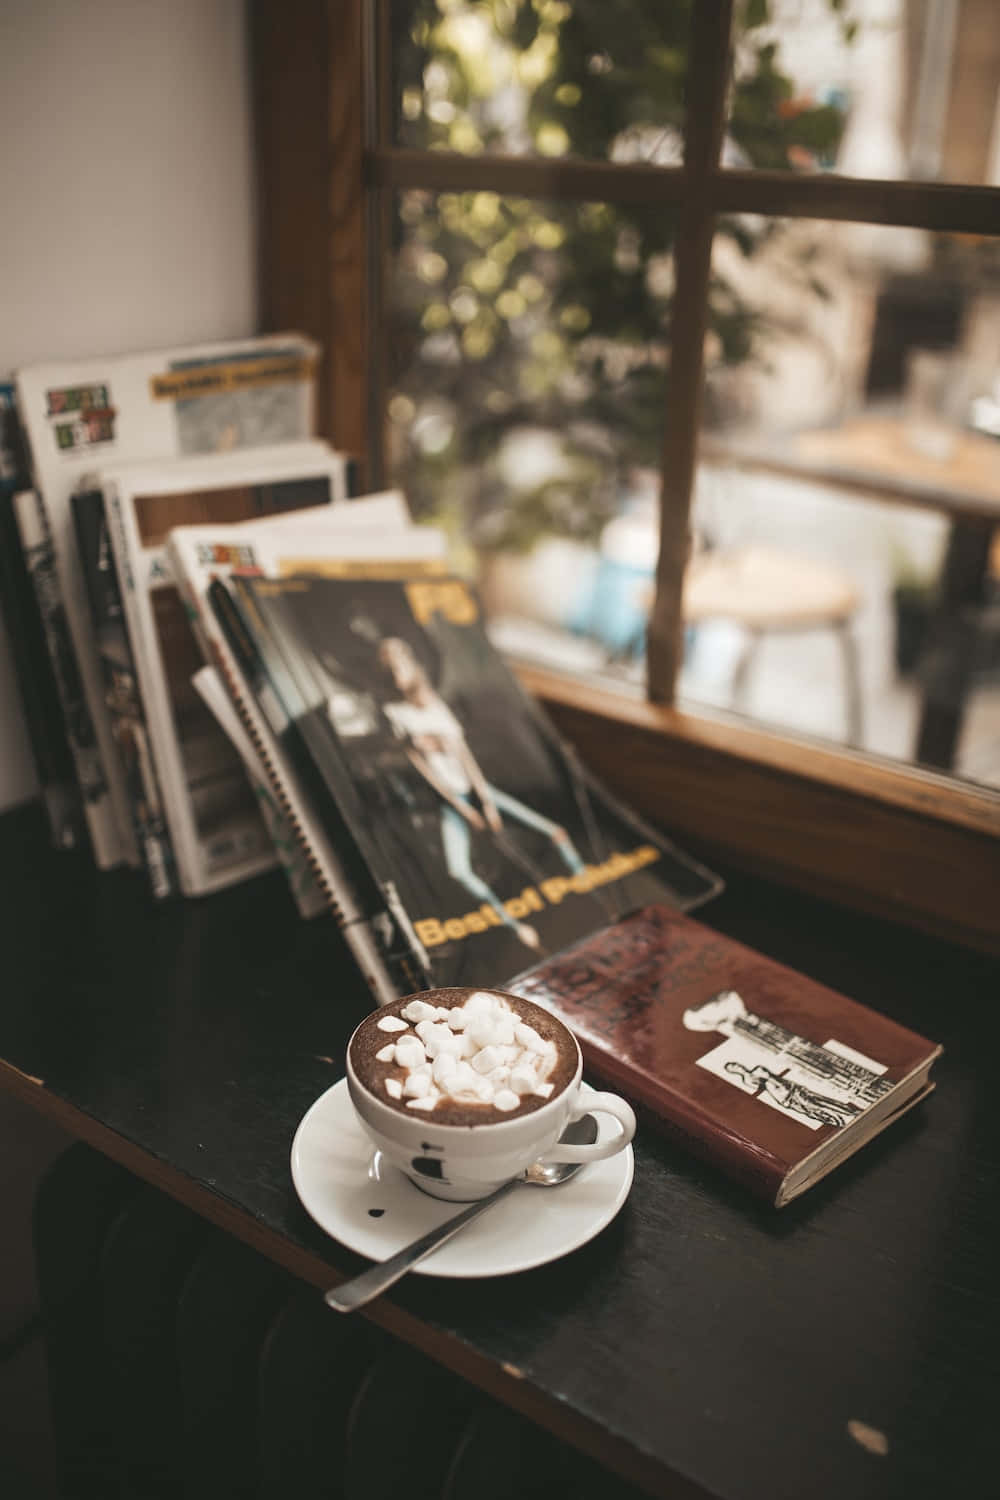 A Cup Of Coffee With A Spoon And Magazines On A Table